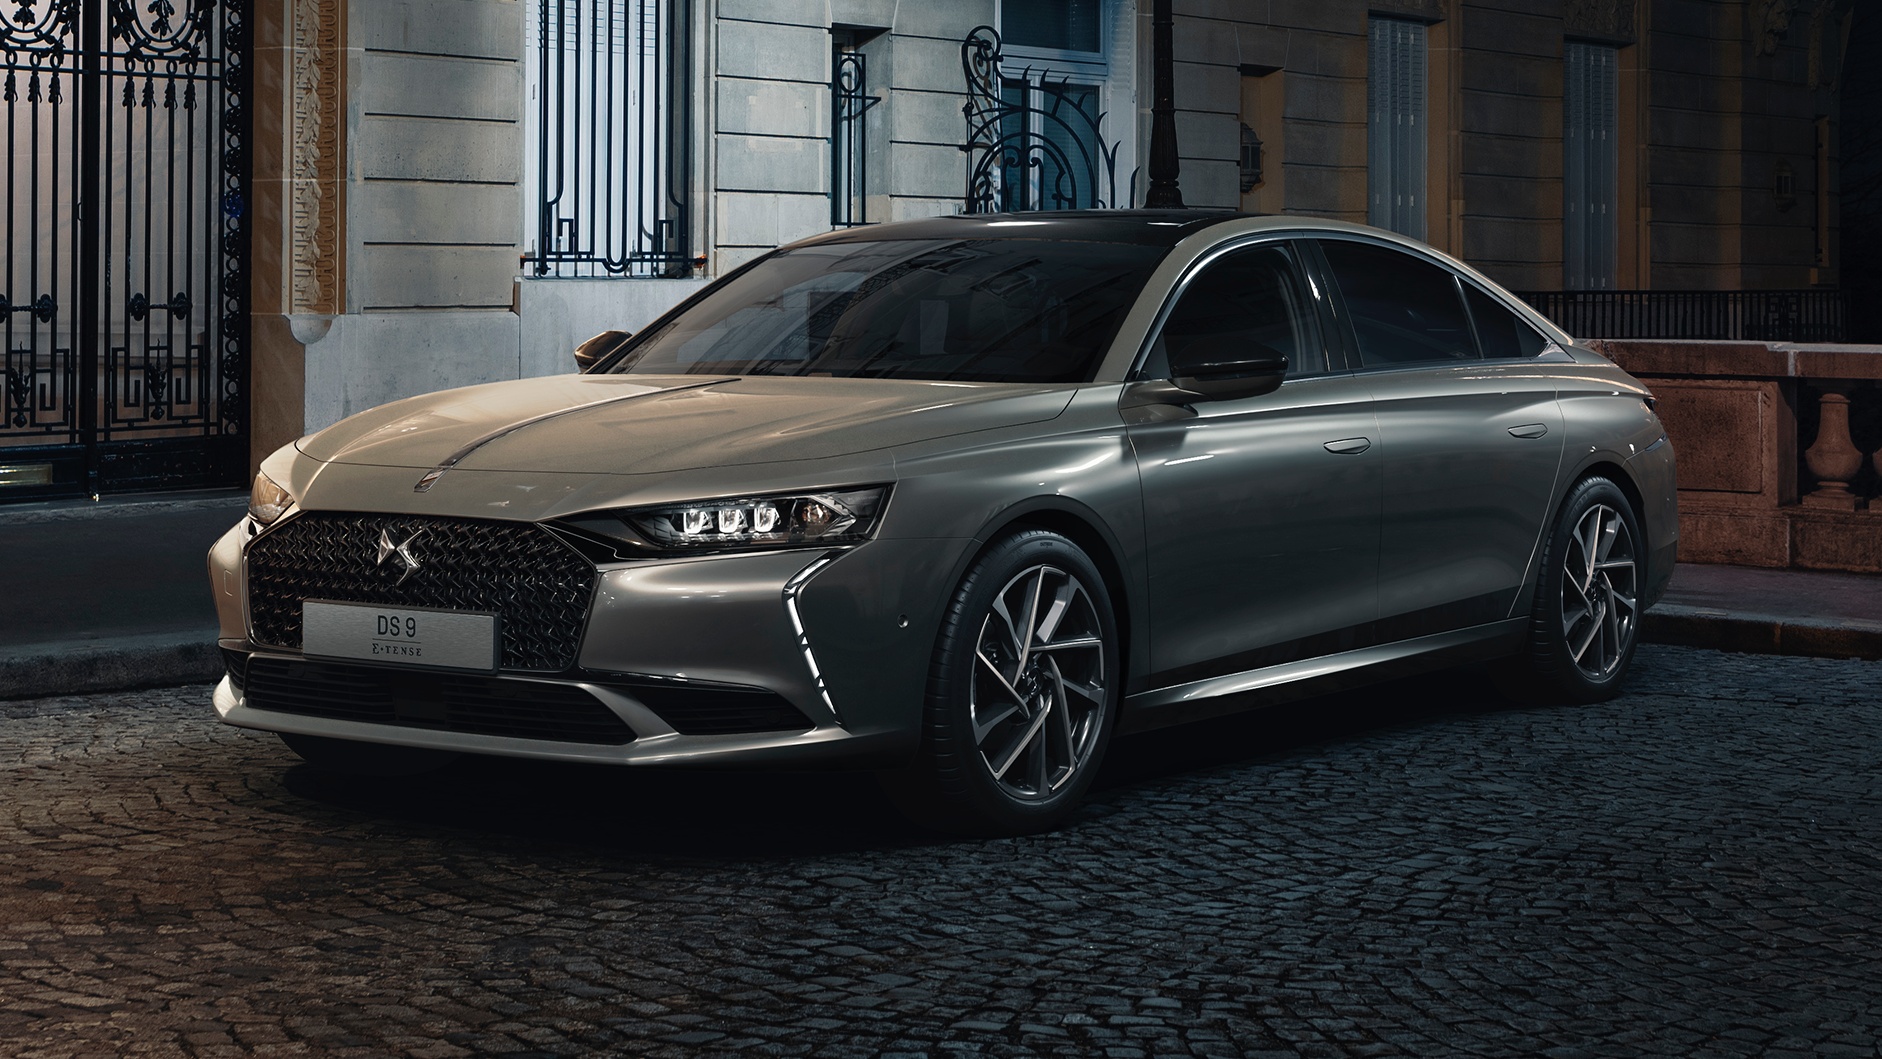 News Ds9 Flagship Saloon Revealed Plug In Hybrid Meets French Luxury